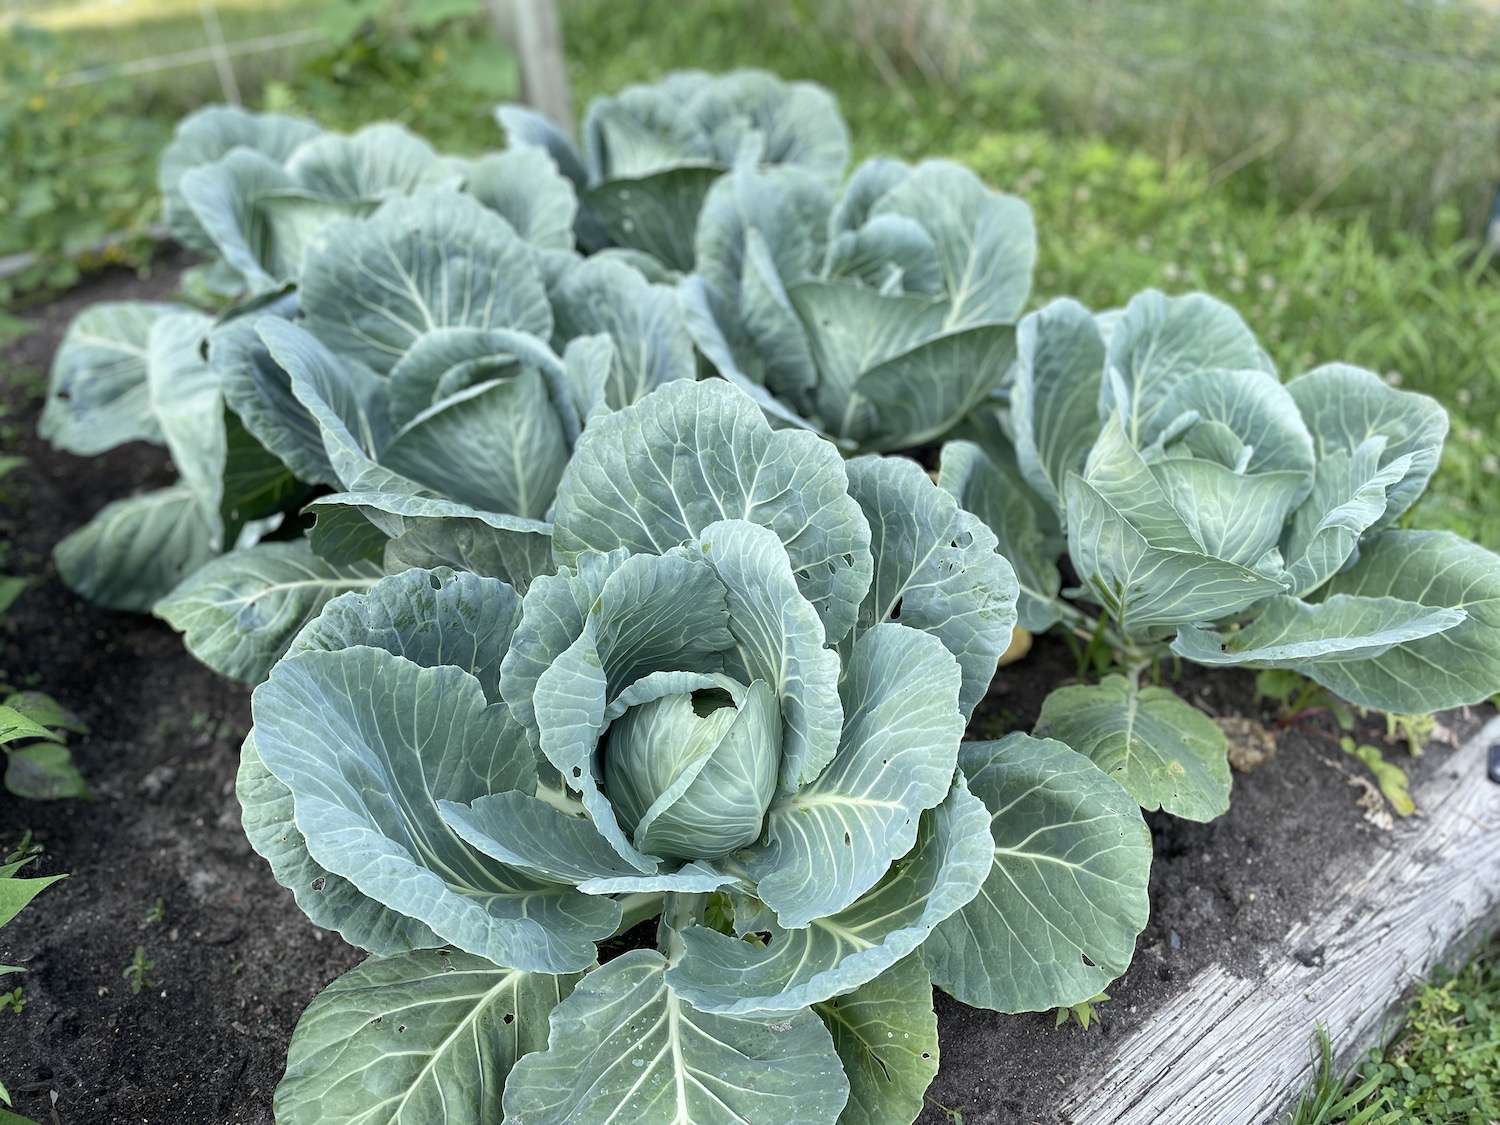 A photo of 6 cabbage plants in the garden